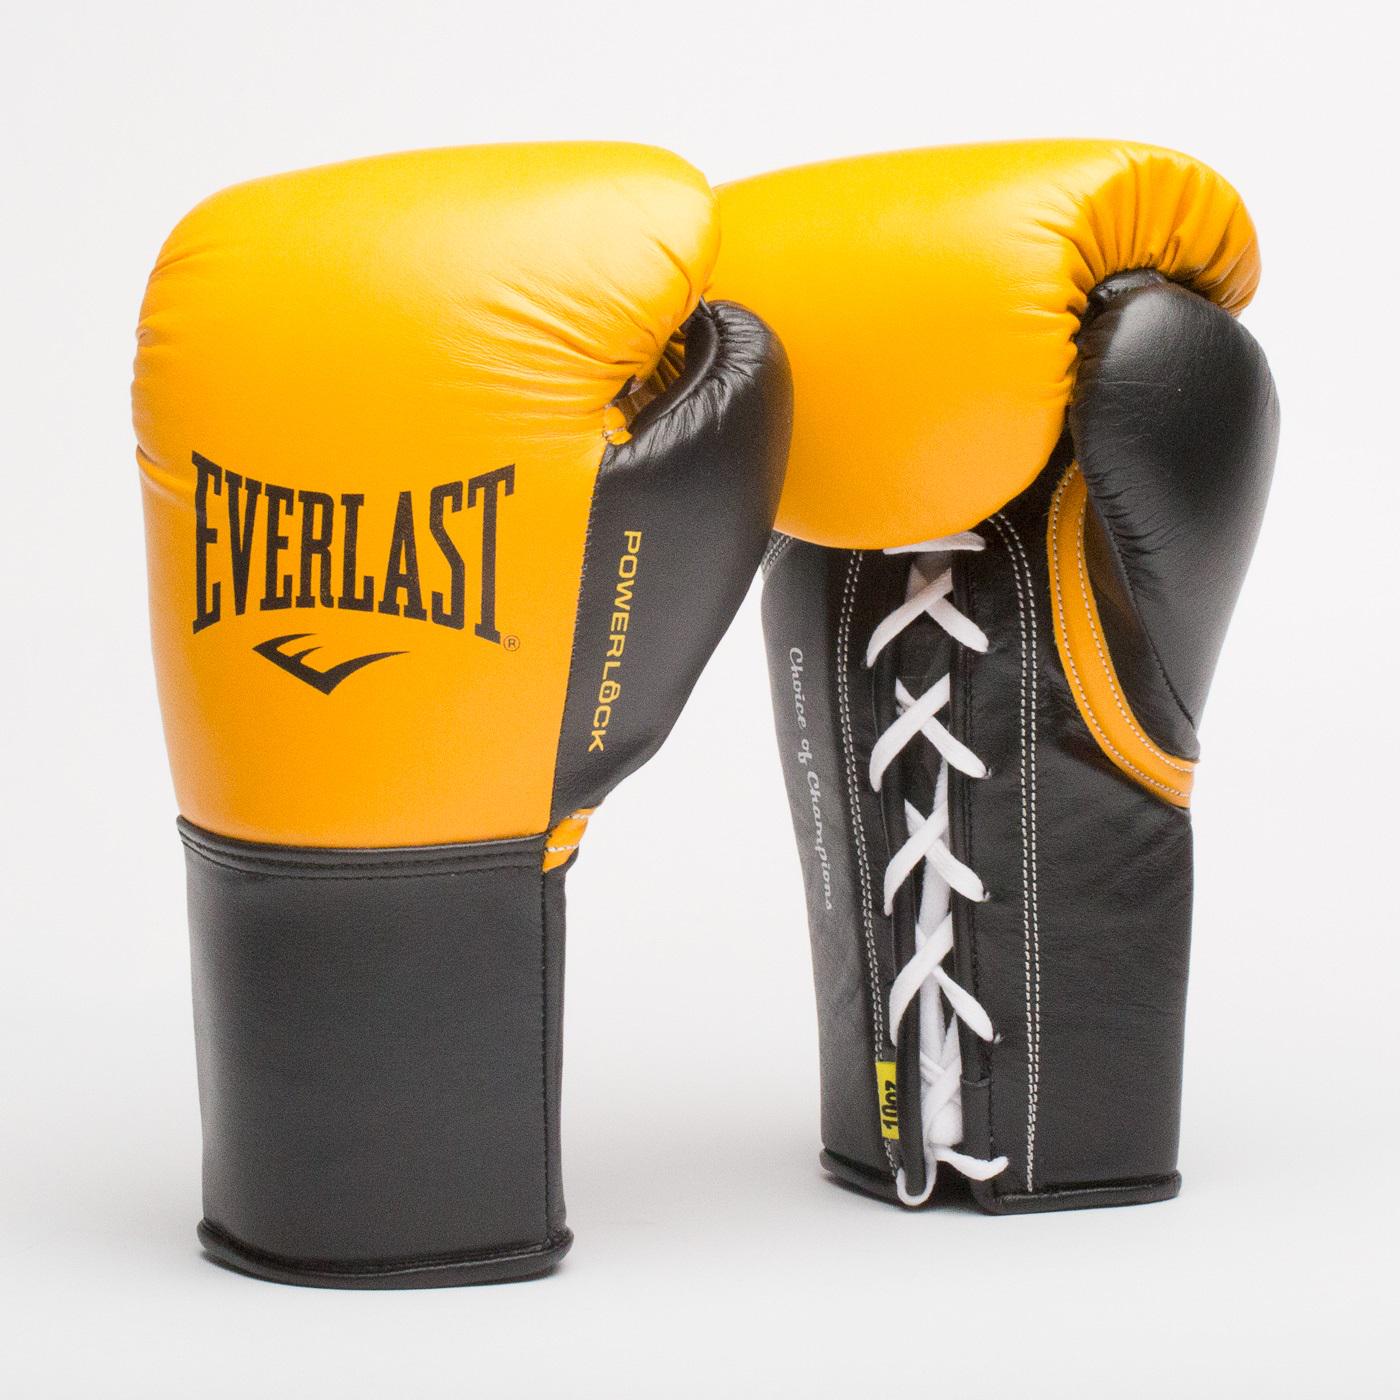 Everlast on Twitter: "Lamborghini yellow gloves for @Jrockboxing , tune  into @FS1 tonight at 9 PM ET to catch all the action #PBConFS1  http://t.co/GJeW13P7ZC" / Twitter